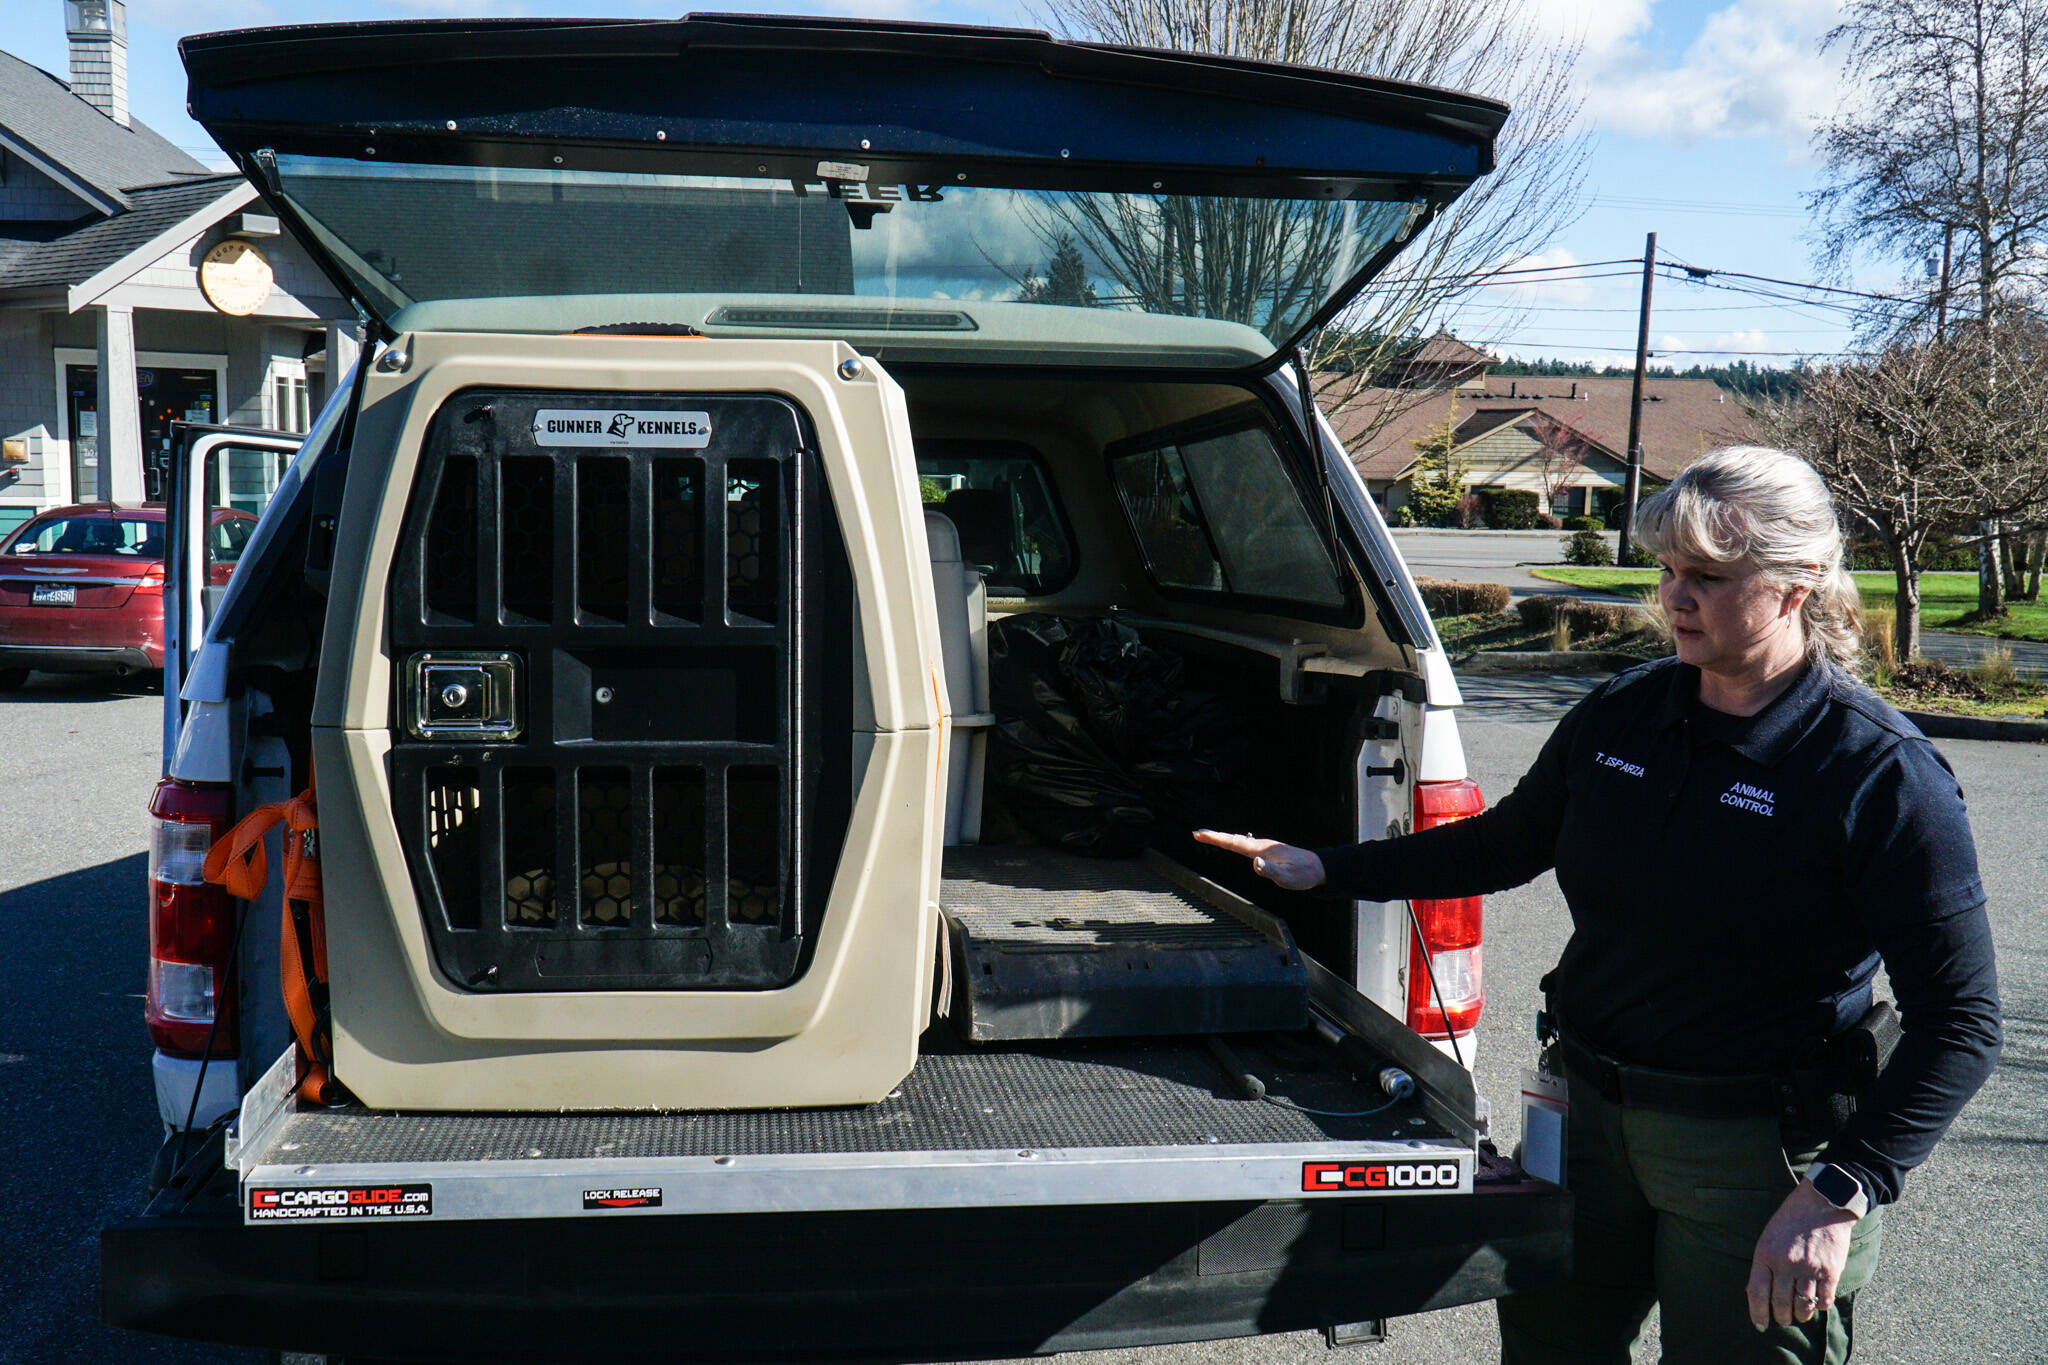 Whidbey Island animal control officer Tammy Esparza displays a kennel from the back of the animal control pick-up. (Photo by Sam Fletcher)